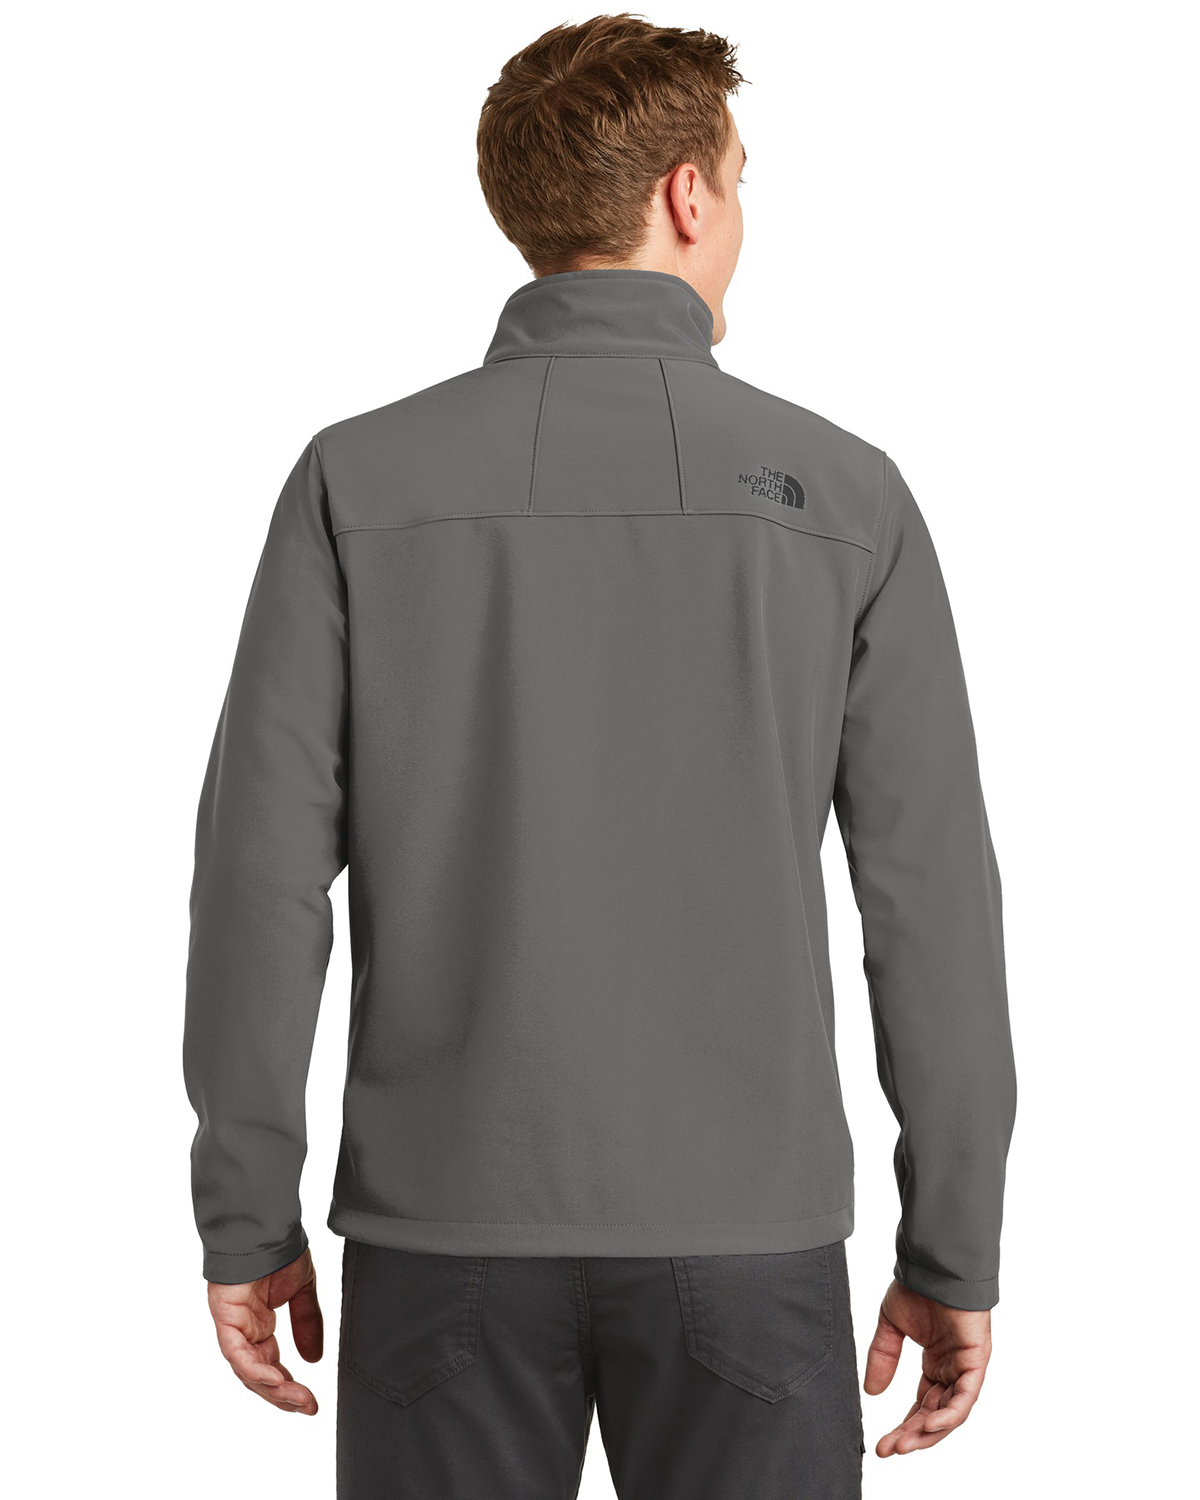 'The North Face NF0A3LGT Apex Barrier Soft Shell Jacket'